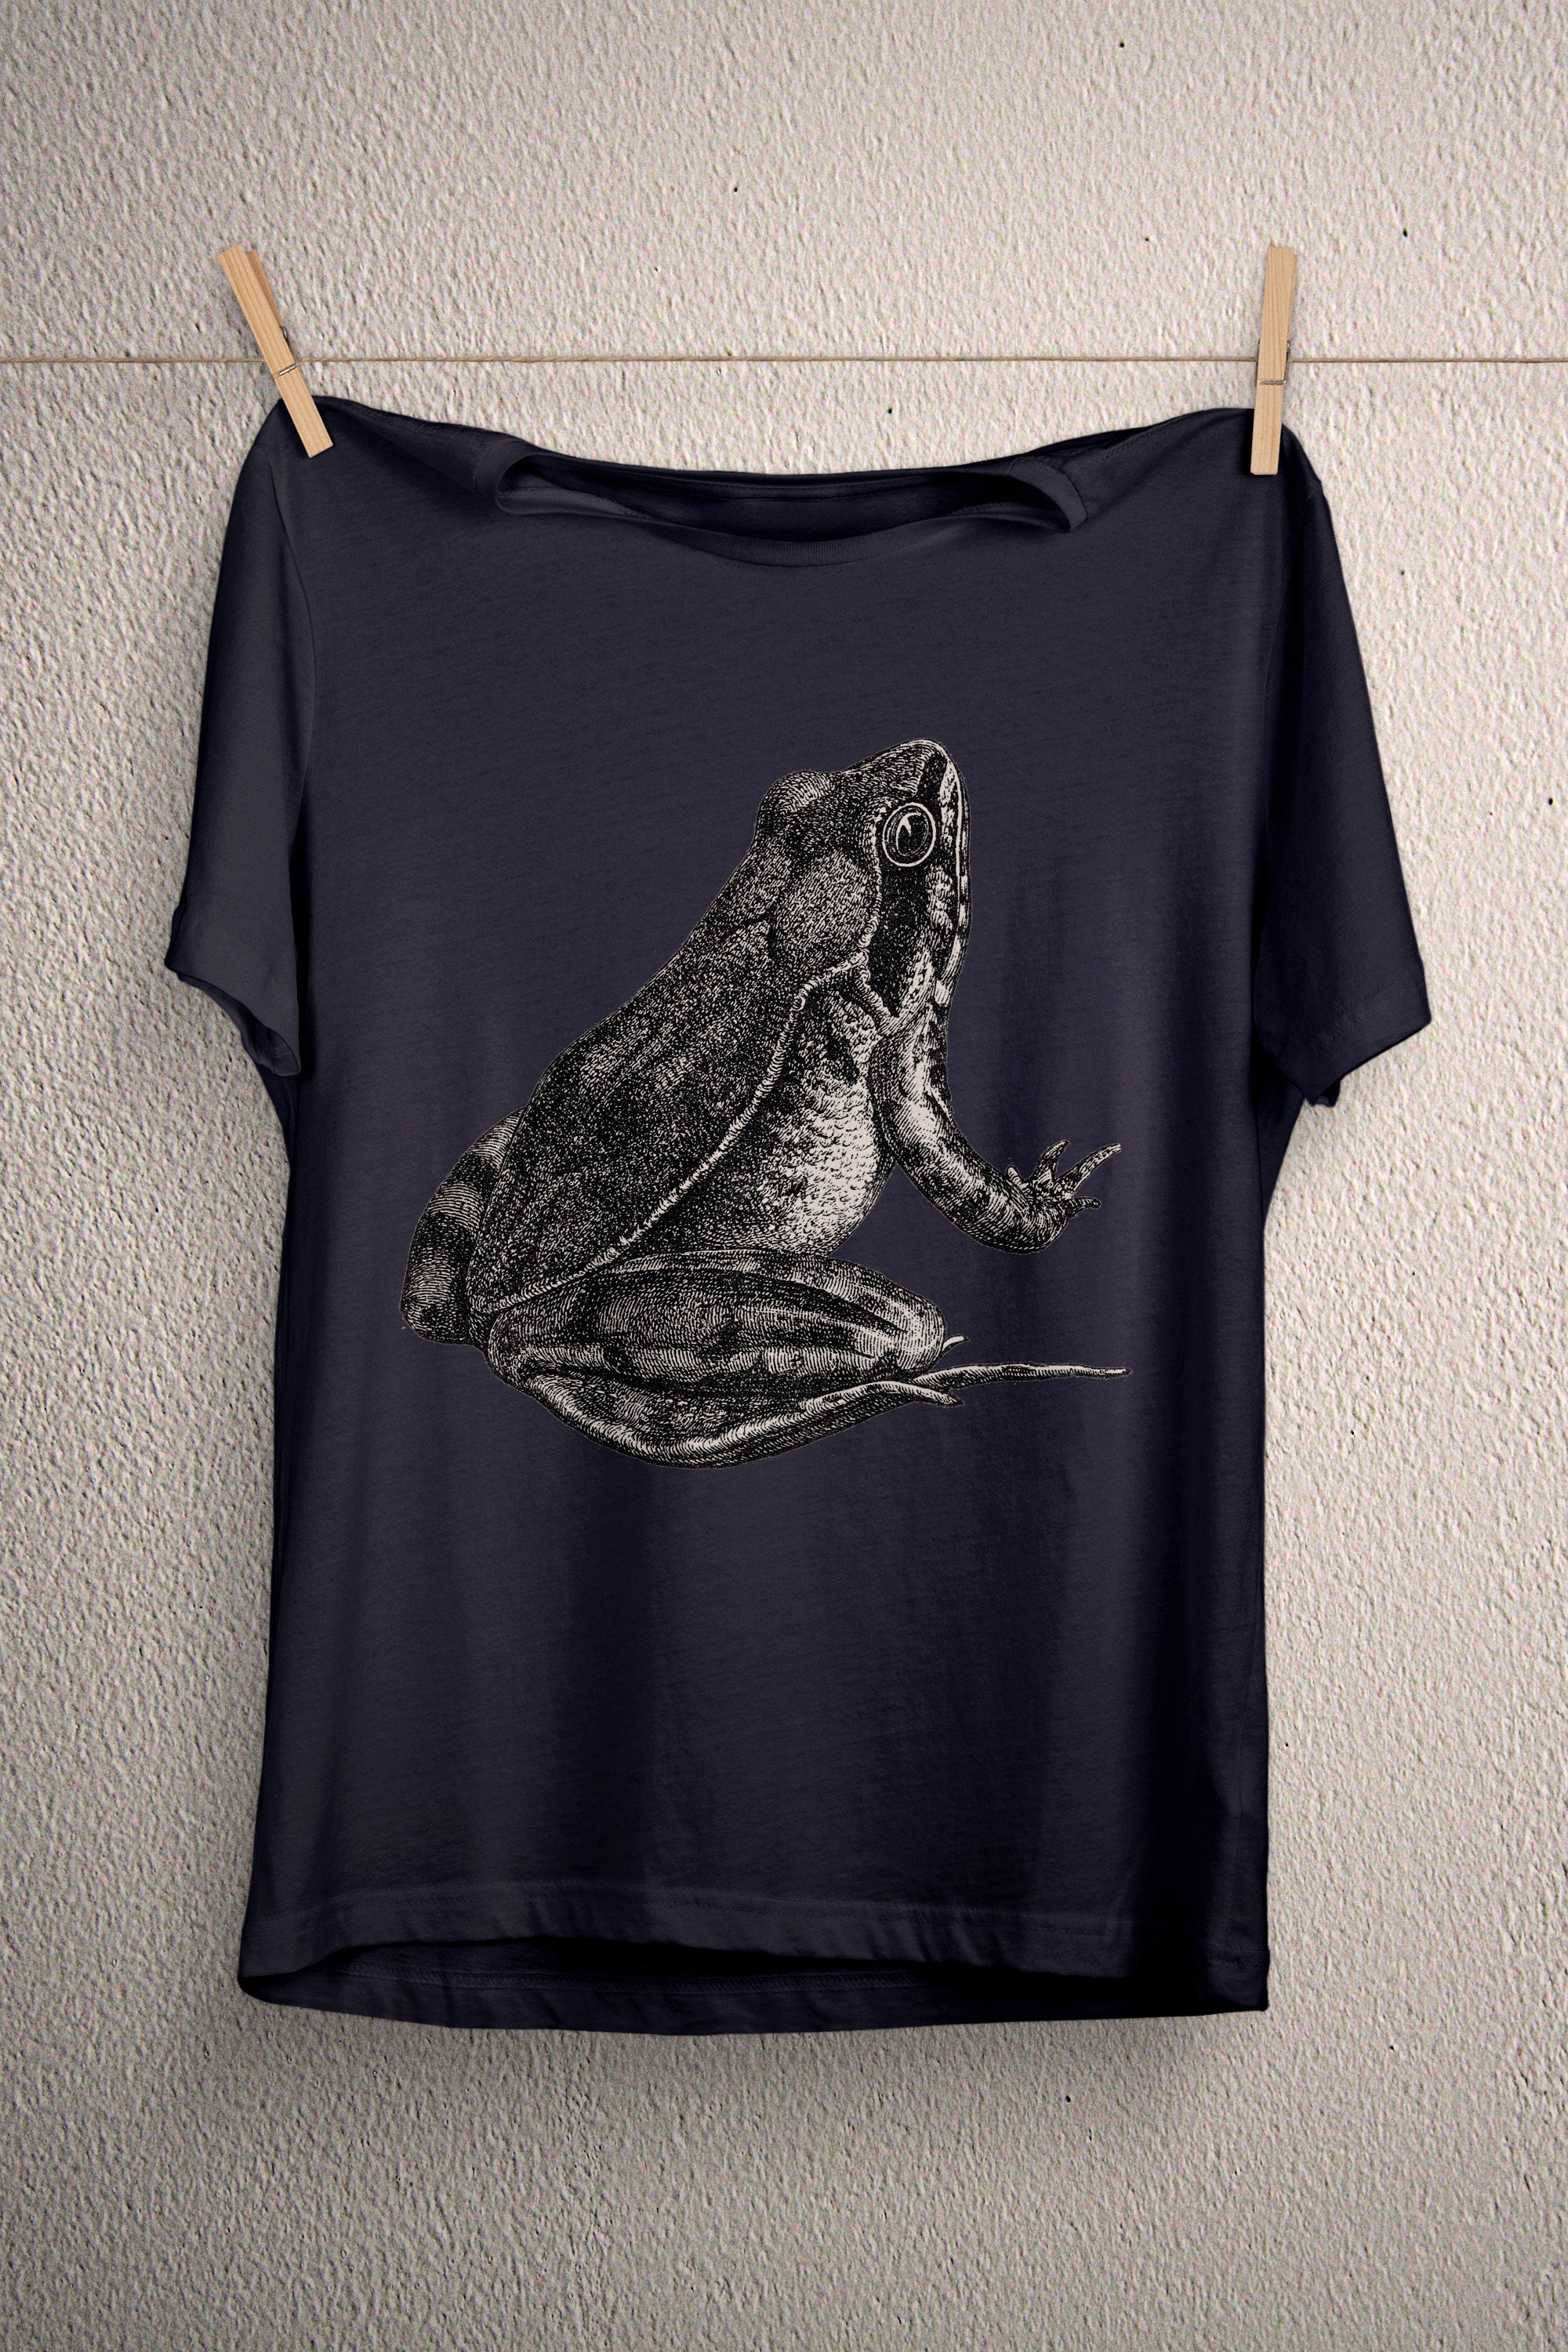 Discover Toad frog t-shirt, animal lover shirt, creepy cute witch clothes, pagan satanic clothing, pastel goth Aesthetic, witchcraft wicca shirt tee